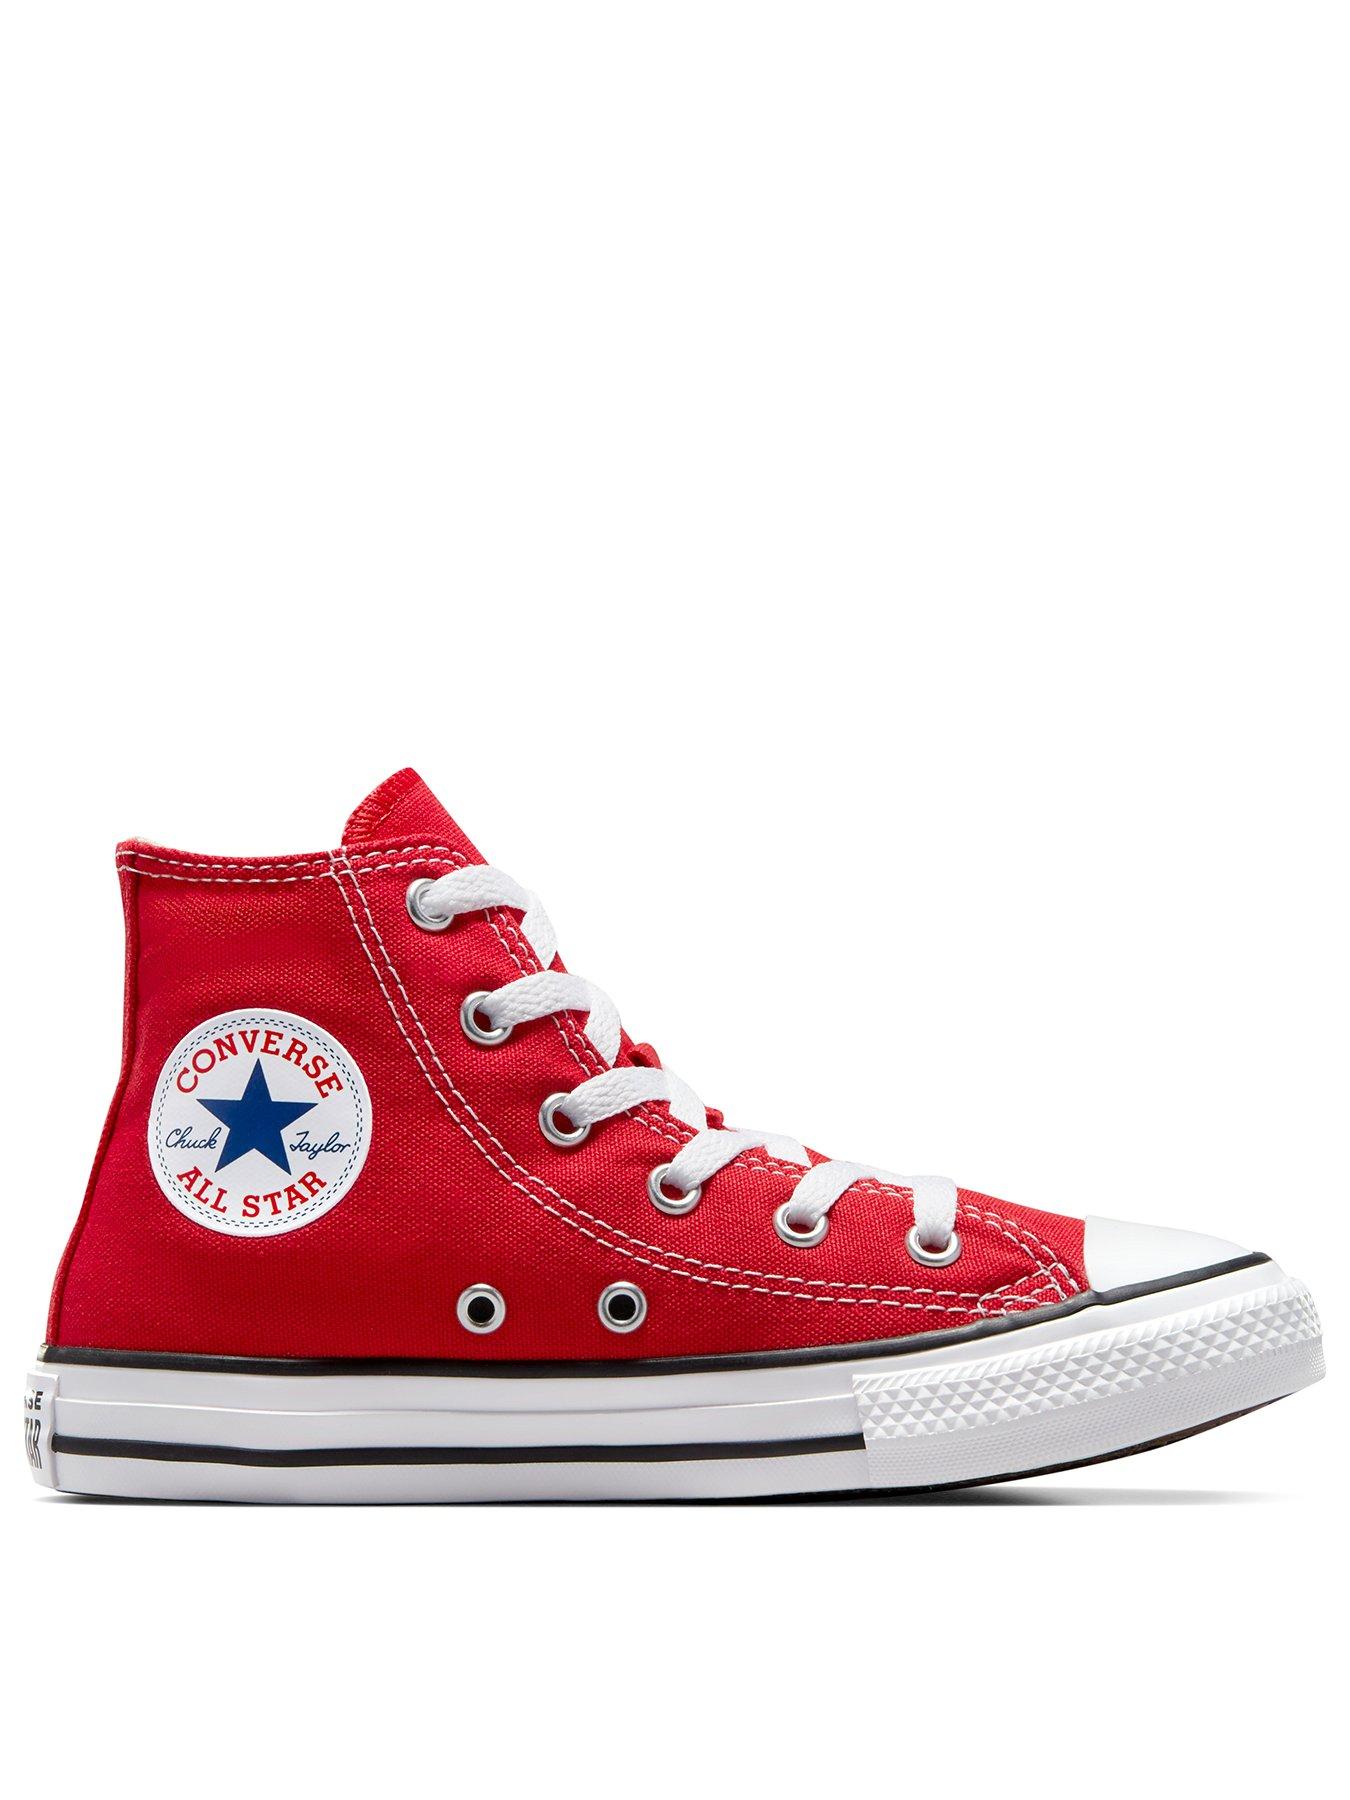 red converse toddler size 11